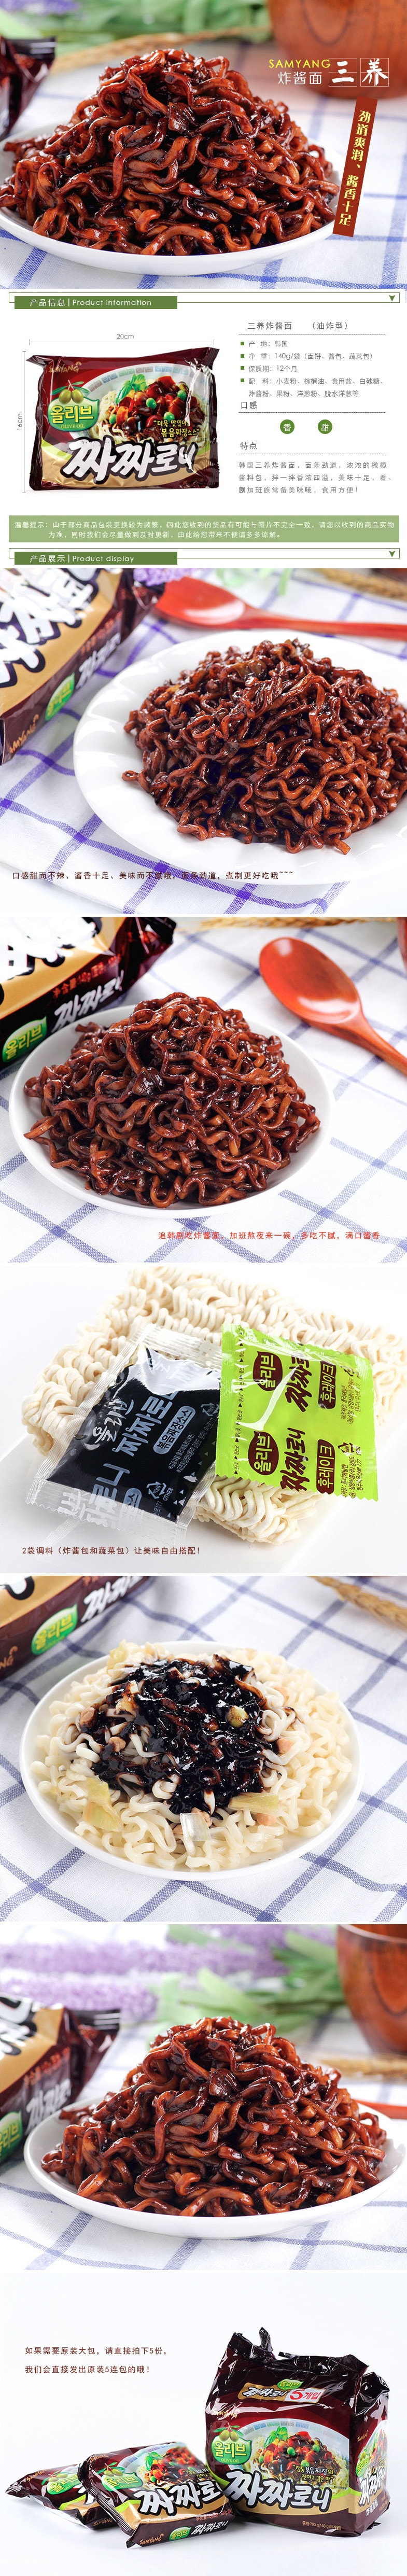 Noodles with Soy Bean Paste140g*5